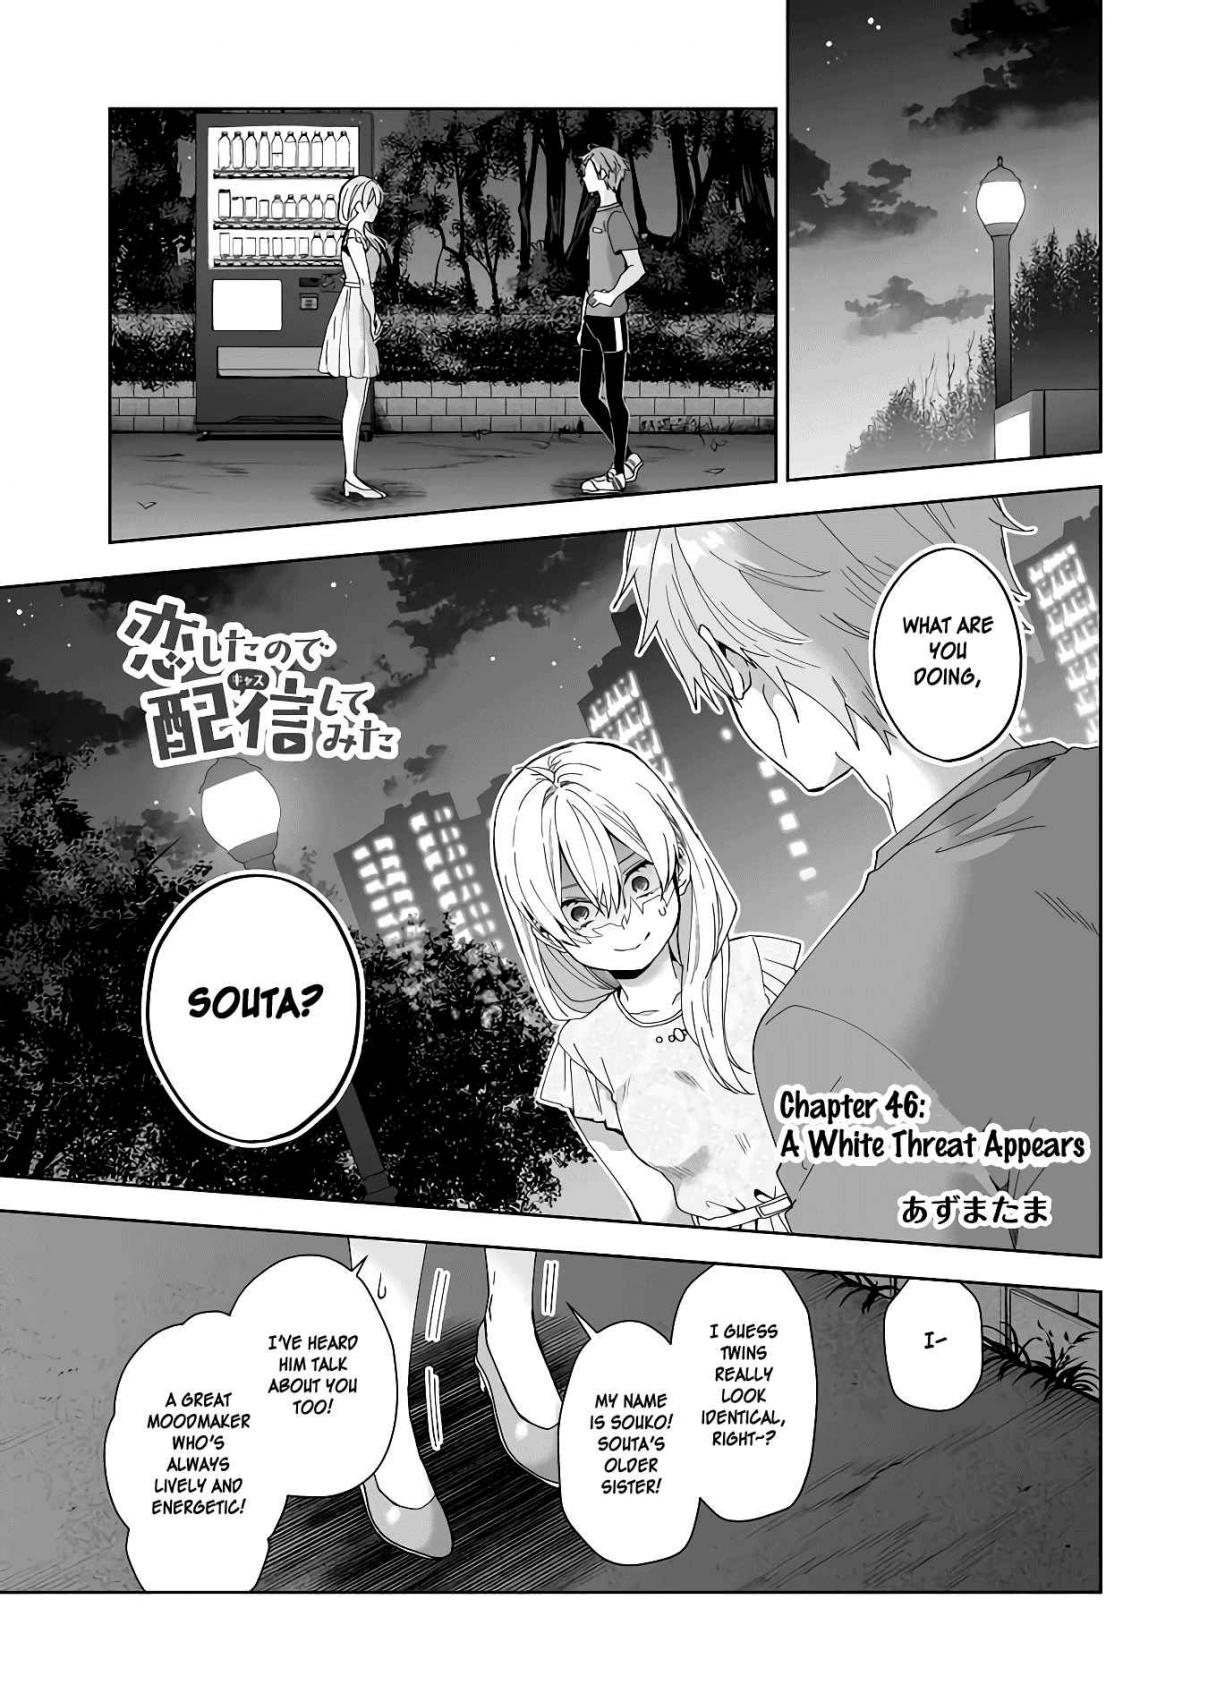 I Fell in Love, so I Tried Livestreaming. Ch. 46 A White Threat Appears